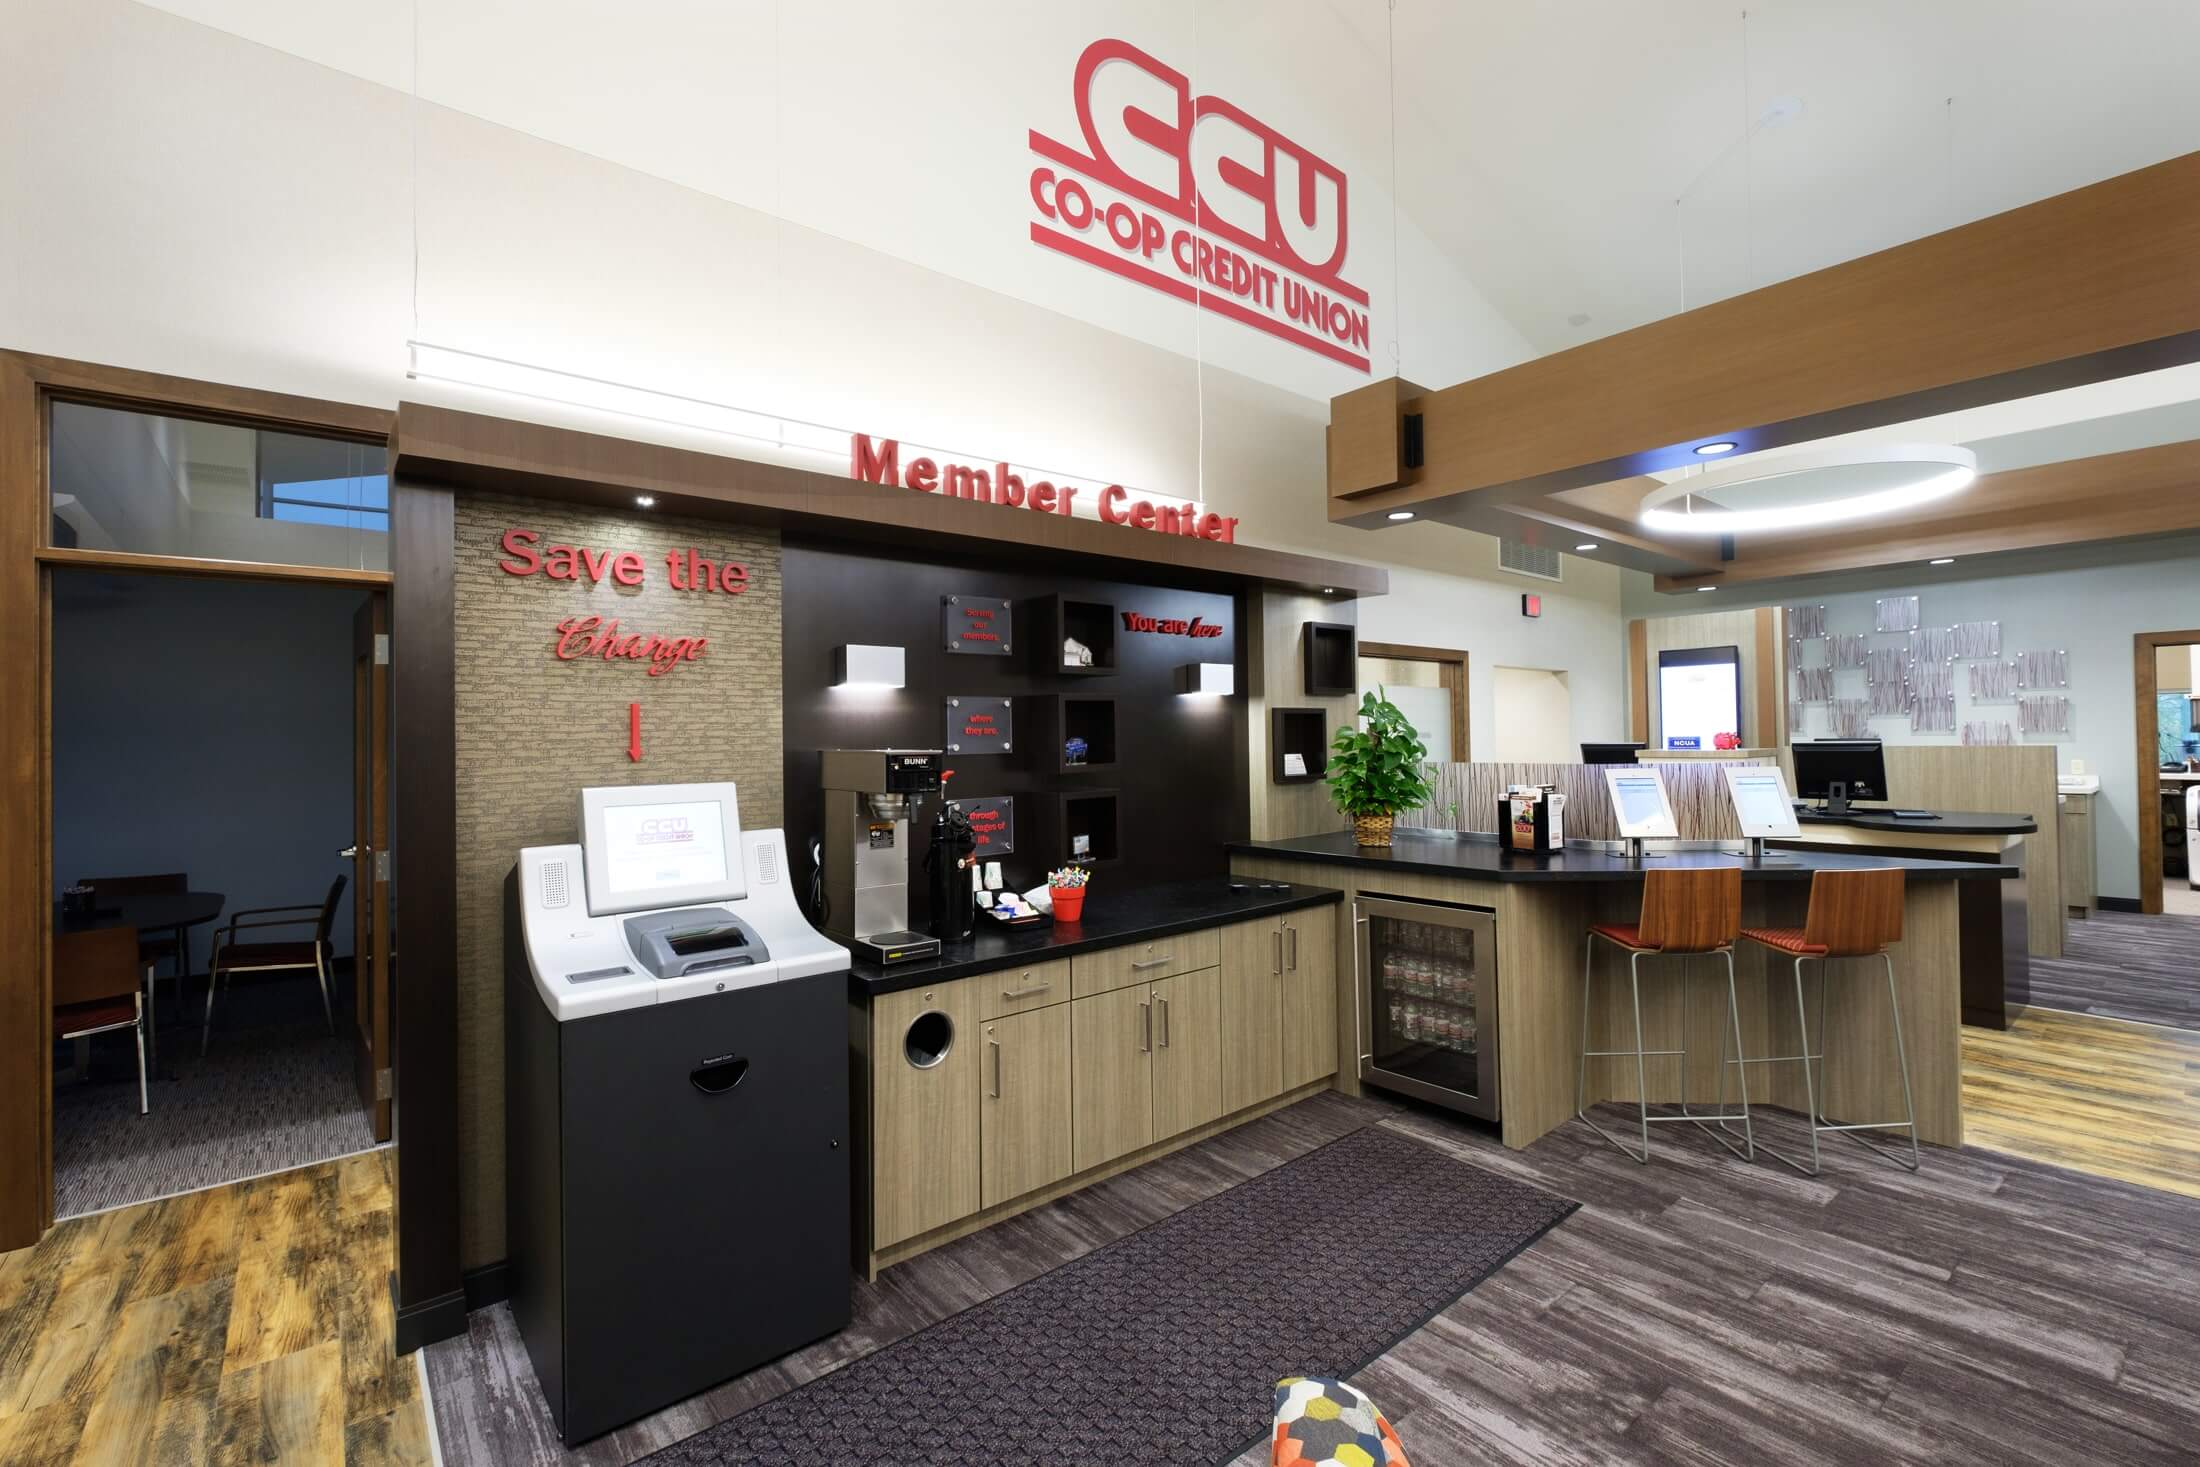 Member center in a new credit union